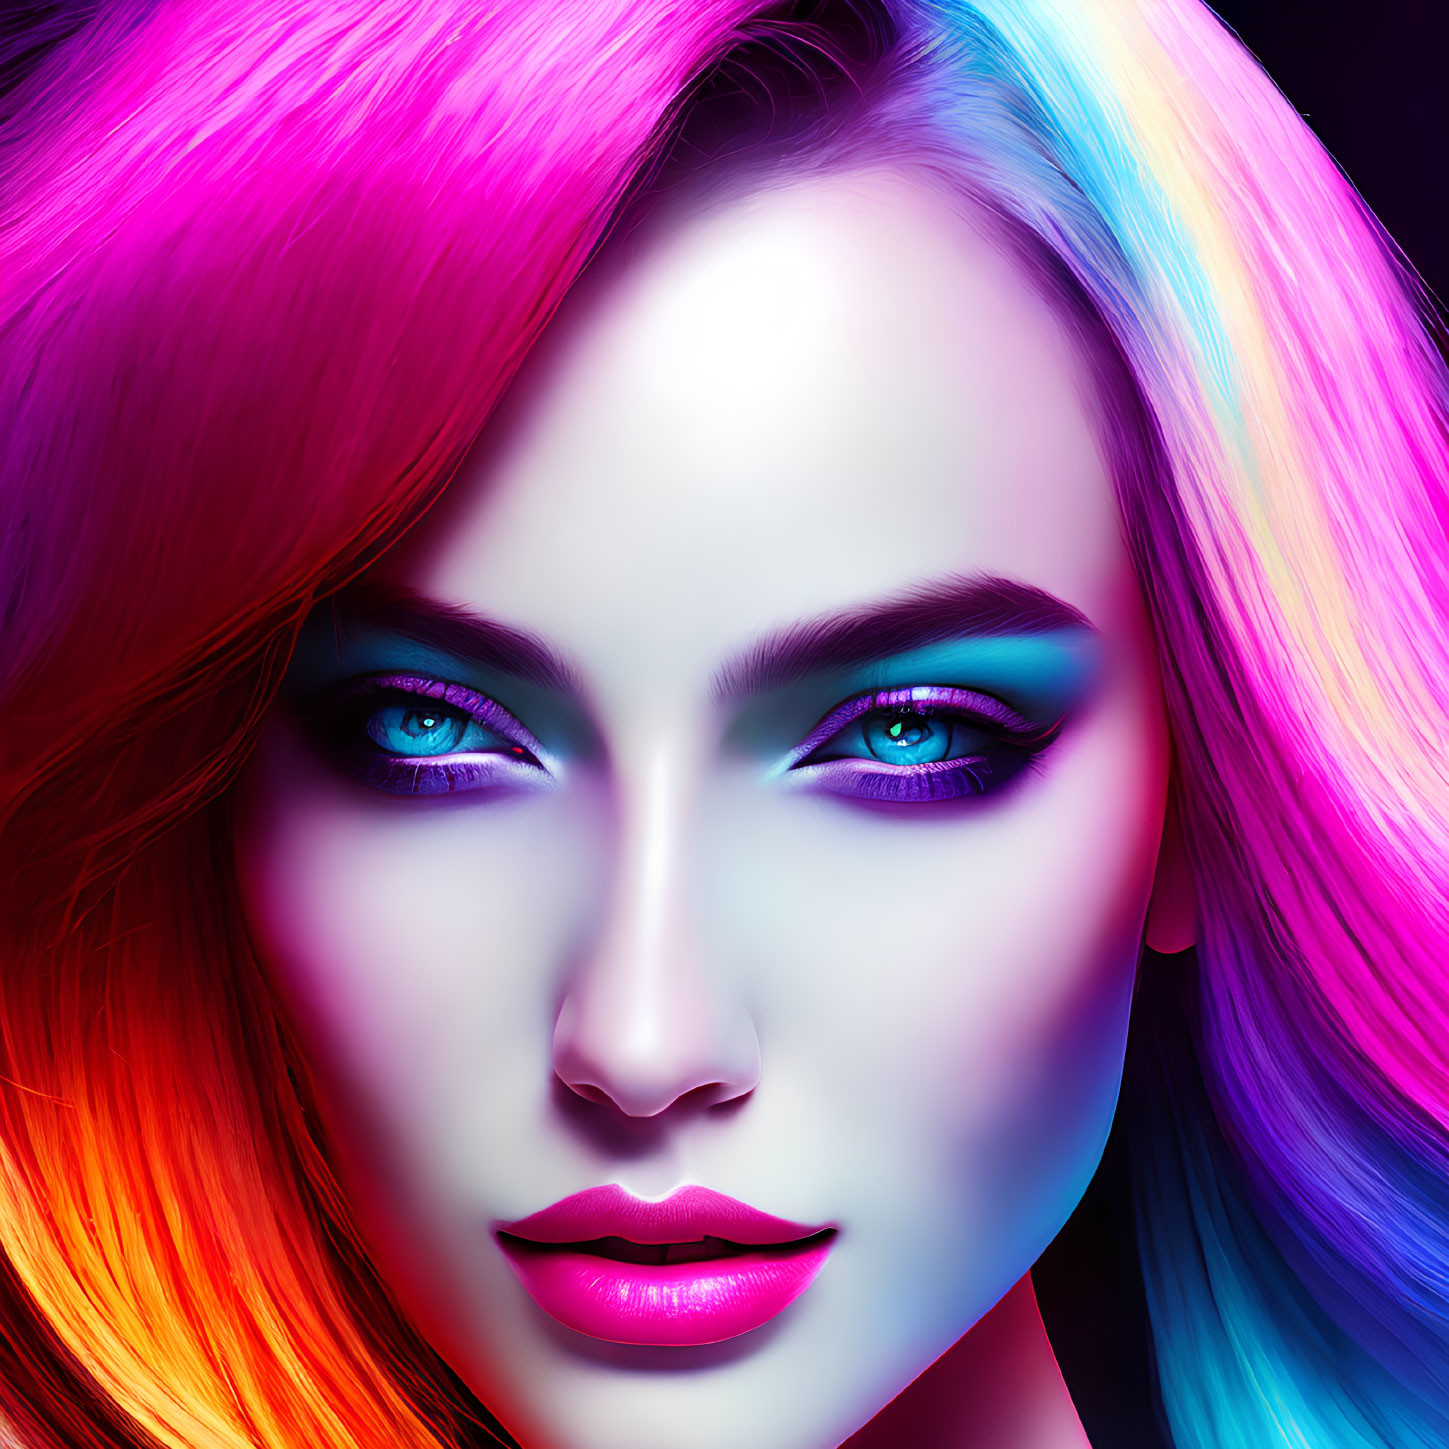 Colorful Woman Portrait with Blue Eye Makeup on Dark Background